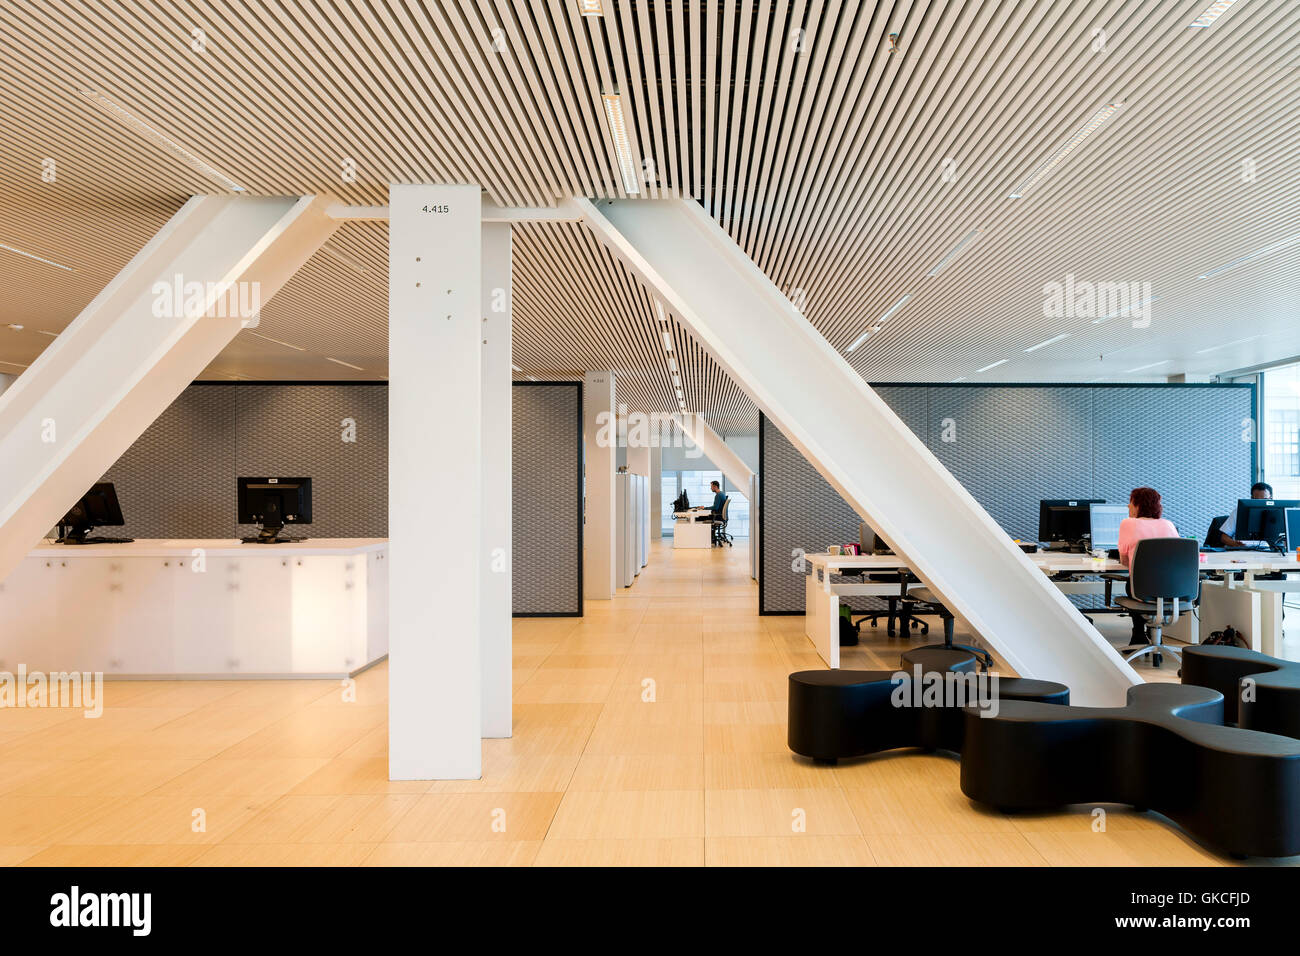 Interior view of office area showing integrated structural pillars. Timmerhuis, Rotterdam, Netherlands. Architect: OMA Rem Koolhaas, 2015. Stock Photo